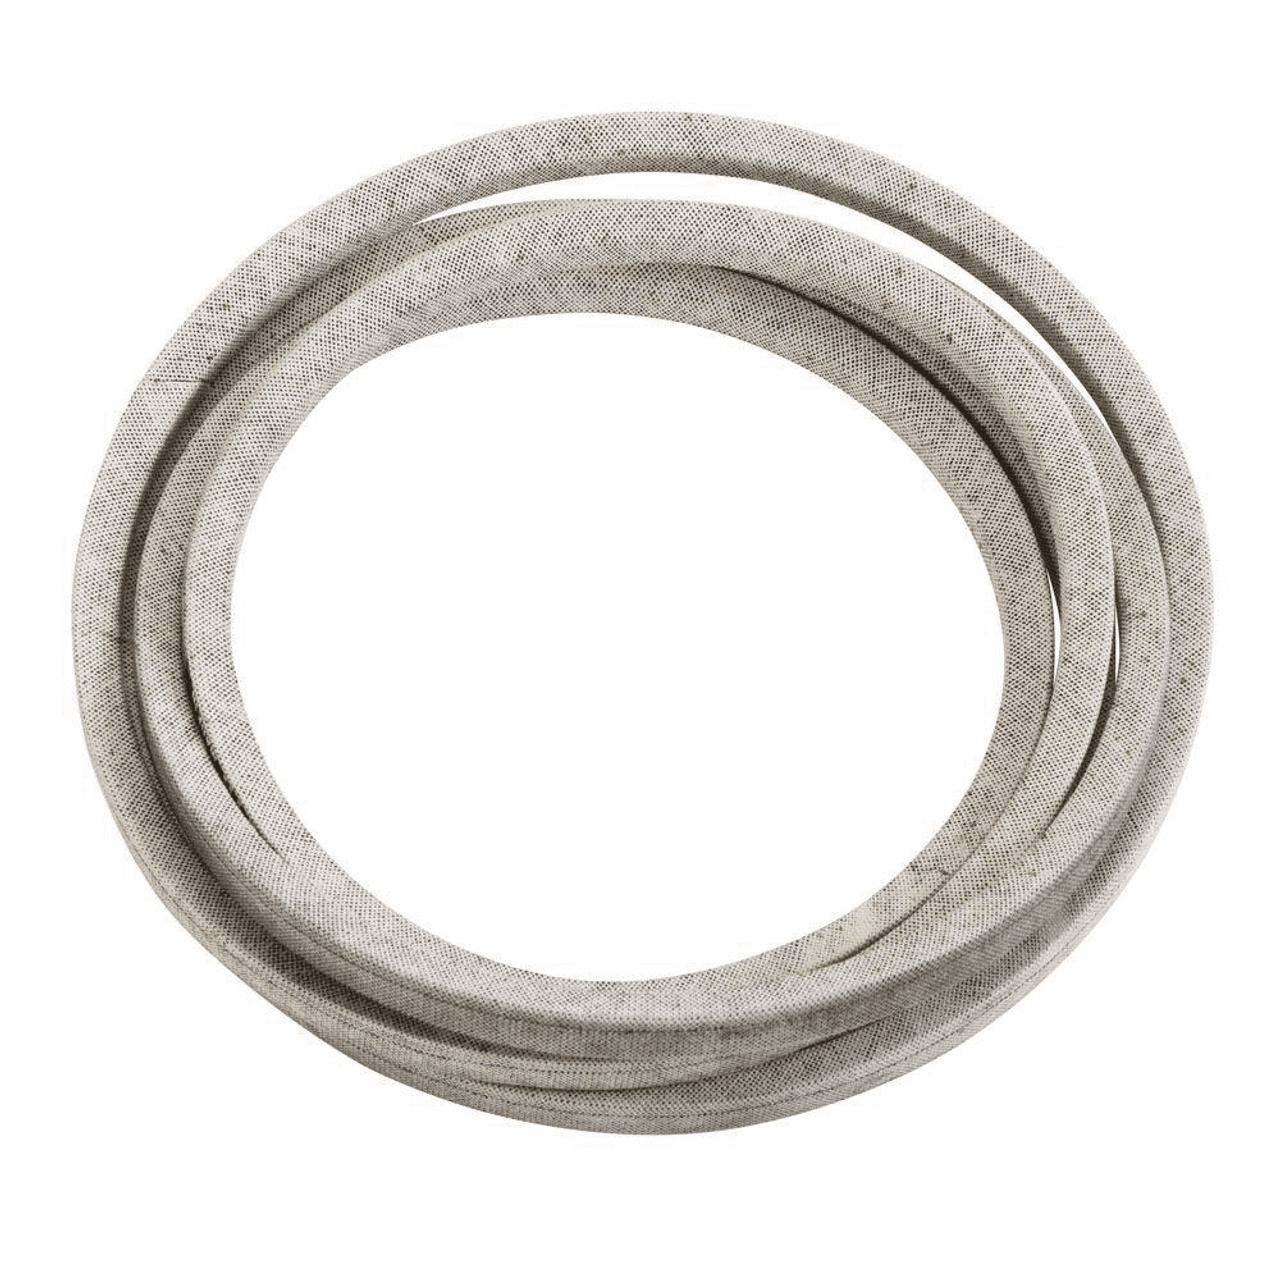 Toro 32" Deck Belt 119-8821
Where Used: Part Number 119-8821
Model Name Diagram
74385, TimeCutter ZS 3200 Riding Mower, 2011 (SN 311000001-311999999) 32 INCH DECK, BELT AND
BLADE ASSEMBLY
74385, TimeCutter ZS 3200 Riding Mower, 2012 (SN 312000001-312999999) 32 INCH DECK, BELT AND
BLADE ASSEMBLY
74385, TimeCutter ZS 3200 Riding Mower, 2013 (SN 313000001-313999999) 32 INCH DECK, BELT AND
BLADE ASSEMBLY
74388, TimeCutter ZS 3200S Riding Mower, 2012 (SN 312000001-312999999) 32 INCH DECK, BELT AND
BLADE ASSEMBLY
74388, TimeCutter ZS 3200S Riding Mower, 2013 (SN 313000001-313999999) 32 INCH DECK, BELT AND
BLADE ASSEMBLY
74388, TimeCutter ZS 3200S Riding Mower, 2014 (SN 314000001-314999999) 32 INCH DECK, BELT AND
BLADE ASSEMBLY
74620, TimeCutter SS 3200 Riding Mower, 2011 (SN 311000001-311999999) 32 INCH DECK, BELT AND
BLADE ASSEMBLY
74621, TimeCutter SS 3200 Riding Mower, 2012 (SN 312000001-312999999) 32 INCH DECK, BELT AND
BLADE ASSEMBLY
74621, TimeCutter SS 3200 Riding Mower, 2013 (SN 313000001-313999999) 32 INCH DECK, BELT AND
BLADE ASSEMBLY
74621, TimeCutter SS 3200 Riding Mower, 2014 (SN 314000001-314999999) 32 INCH DECK, BELT AND
BLADE ASSEMBLY
74629, TimeCutter SS 3216 Riding Mower, 2014 (SN 314000001-314999999) 32 INCH DECK, BELT AND
BLADE ASSEMBLY
74650, TimeCutter ZS 3200S Riding Mower, (SN 401000000-999999999) 32 INCH DECK ASSEMBLY
74650, TimeCutter ZS 3200S Riding Mower, 2015 (SN 315000001-315999999) 32 INCH DECK, BELT AND
BLADE ASSEMBLY
74650, TimeCutter ZS 3200S Riding Mower, 2016 (SN 316000001-316999999) 32 INCH DECK, BELT AND
BLADE ASSEMBLY
74650, TimeCutter ZS 3200S Riding Mower, 2017 (SN 400000000-400999999) 32 INCH DECK ASSEMBLY
74670, TimeCutter SW 3200 Riding Mower, (SN 402000000-999999999) 32 INCH DECK, BELT AND
BLADE ASSEMBLY
74670, TimeCutter SW 3200 Riding Mower, 2015 (SN 315000001-315999999) 32 INCH DECK, BELT AND
BLADE ASSEMBLY
74670, TimeCutter SW 3200 Riding Mower, 2016 (SN 316000001-316999999) 32 INCH DECK, BELT AND
BLADE ASSEMBLY
74670, TimeCutter SW 3200 Riding Mower, 2017 (SN 400000000-999999999) 32 INCH DECK, BELT AND
BLADE ASSEMBLY
74710, TimeCutter SS 3225 Riding Mower, (SN 401300000-999999999) 32 INCH DECK ASSEMBLY
74710, TimeCutter SS 3225 Riding Mower, 2015 (SN 315000001-315000874) 32 INCH DECK, BELT AND
BLADE ASSEMBLY
74710, TimeCutter SS 3225 Riding Mower, 2015 (SN 315000875-315999999) 32 INCH DECK, BELT AND
BLADE ASSEMBLY
74710, TimeCutter SS 3225 Riding Mower, 2016 (SN 316000001-316999999) 32 INCH DECK, BELT AND
BLADE ASSEMBLY
74710, TimeCutter SS 3225 Riding Mower, 2017 (SN 400000000-401299999) 32 INCH DECK ASSEMBLY
74780, TimeCutter SW 3200 Riding Mower, (SN 401100000-999999999) 32 INCH DECK ASSEMBLY
74780, TimeCutter SW 3200 Riding Mower, 2015 (SN 315000001-315999999) 32 INCH DECK, BELT AND
BLADE ASSEMBLY
74780, TimeCutter SW 3200 Riding Mower, 2016 (SN 316000001-316999999) 32 INCH DECK, BELT AND
BLADE ASSEMBLY
74780, TimeCutter SW 3200 Riding Mower, 2017 (SN 400000000-401099999) 32 INCH DECK ASSEMBLY
74781, TimeCutter SW 3200 Riding Mower, 2015 (SN 315000001-315999999) 32 INCH DECK, BELT AND
BLADE ASSEMBLY